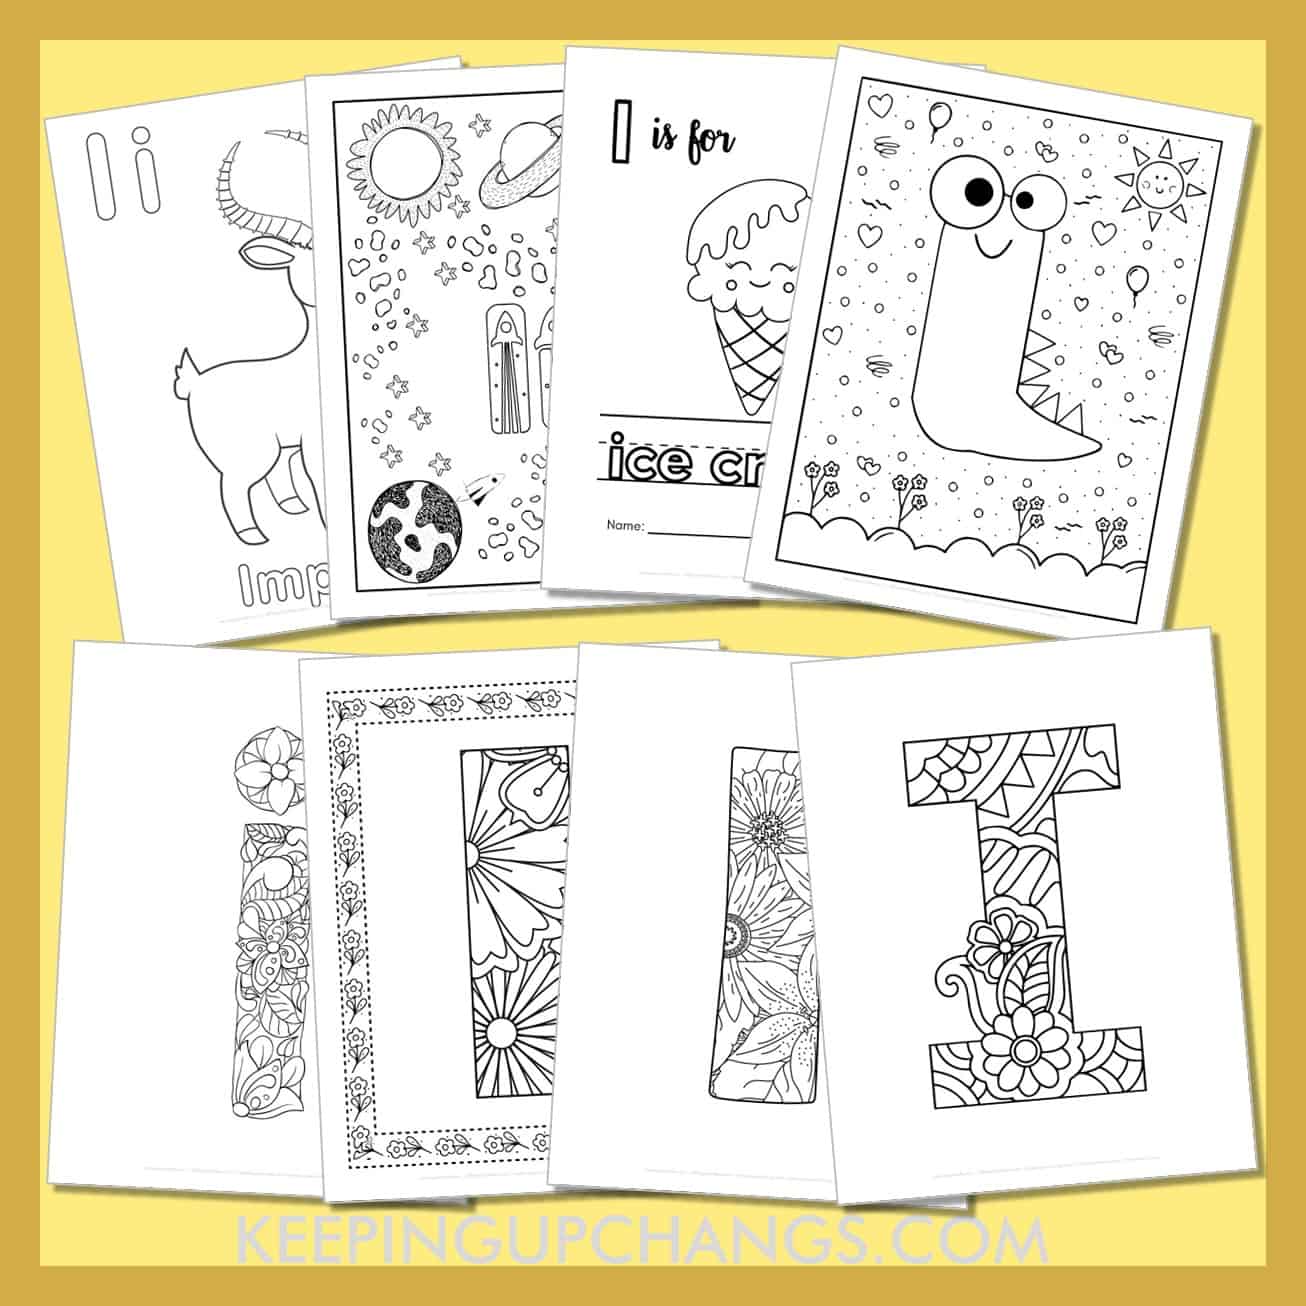 free alphabet letter i to color for toddlers, preschool, kindergarten, to adults.